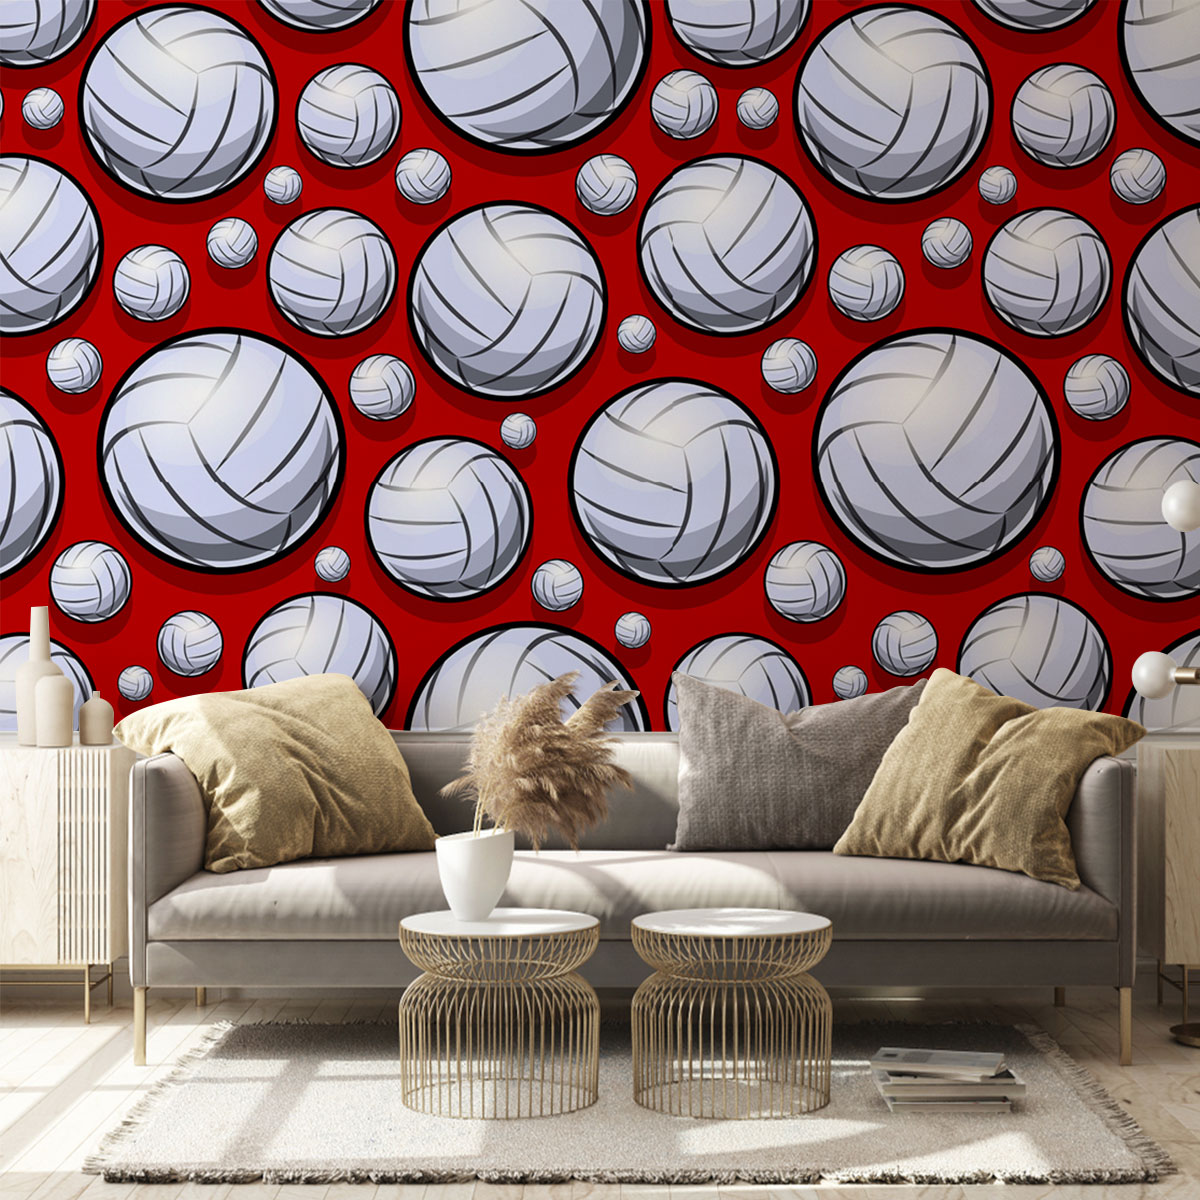 Red Volleyball Wall Mural